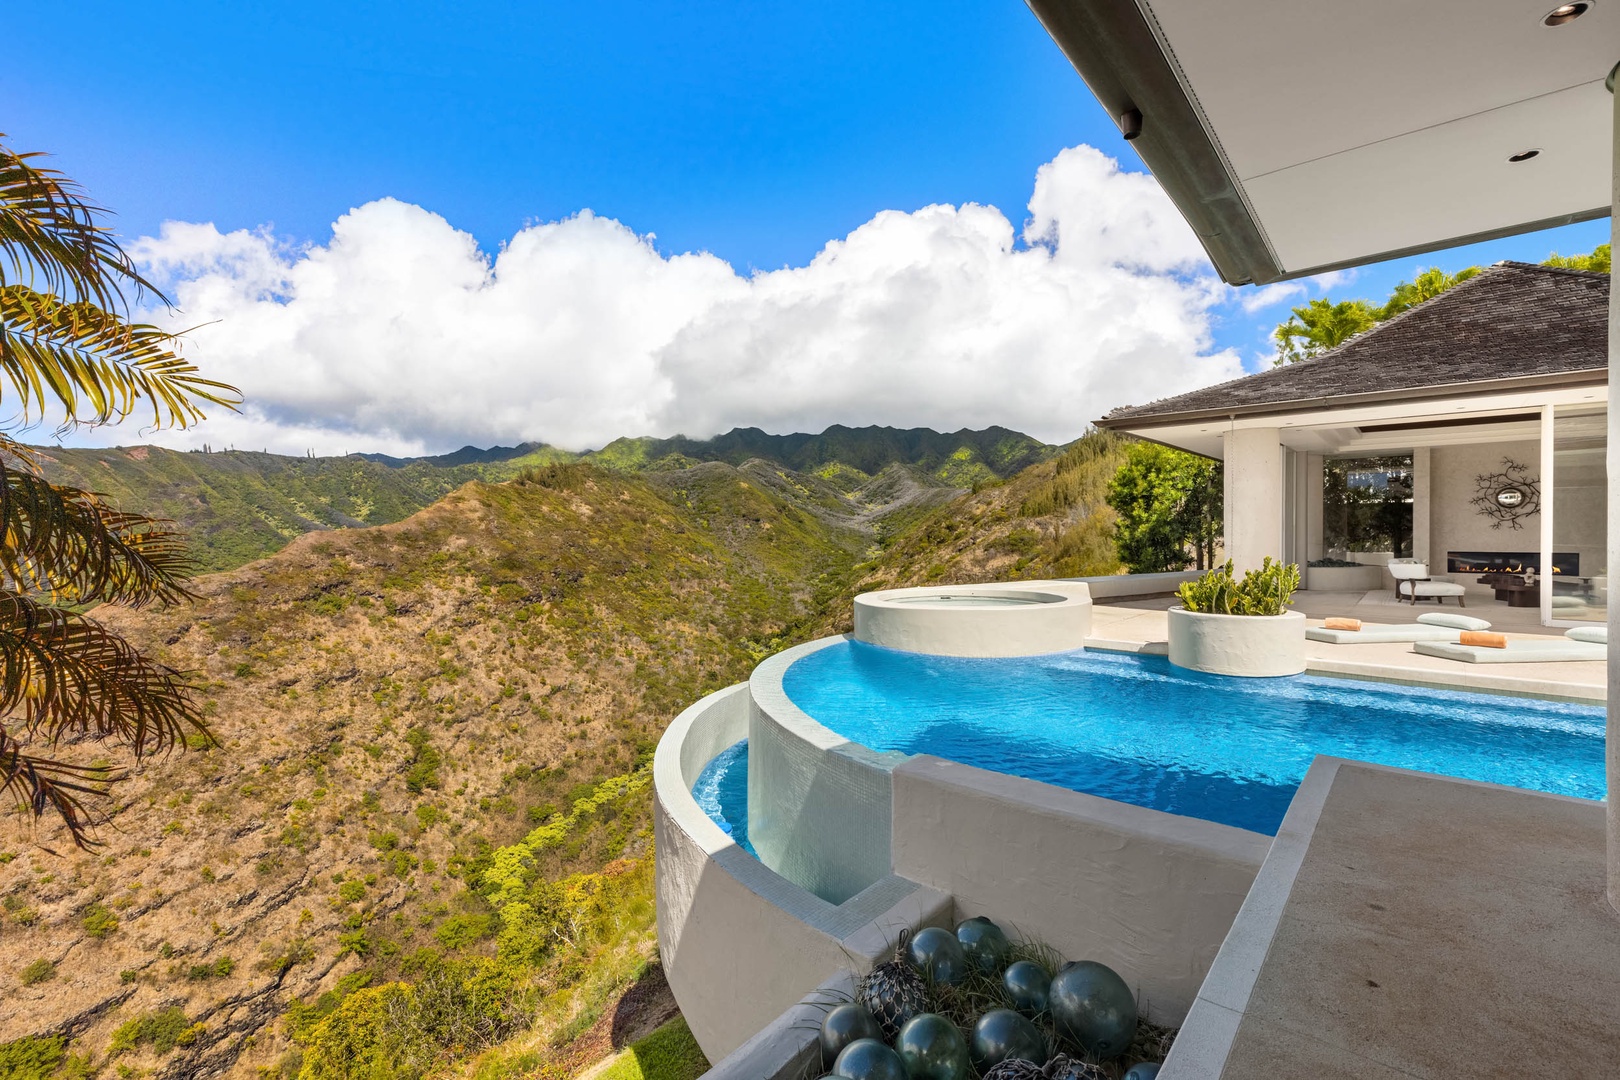 Honolulu Vacation Rentals, Sky Ridge House - Uninterrupted views and tranquil waters create the perfect ridge top oasis.